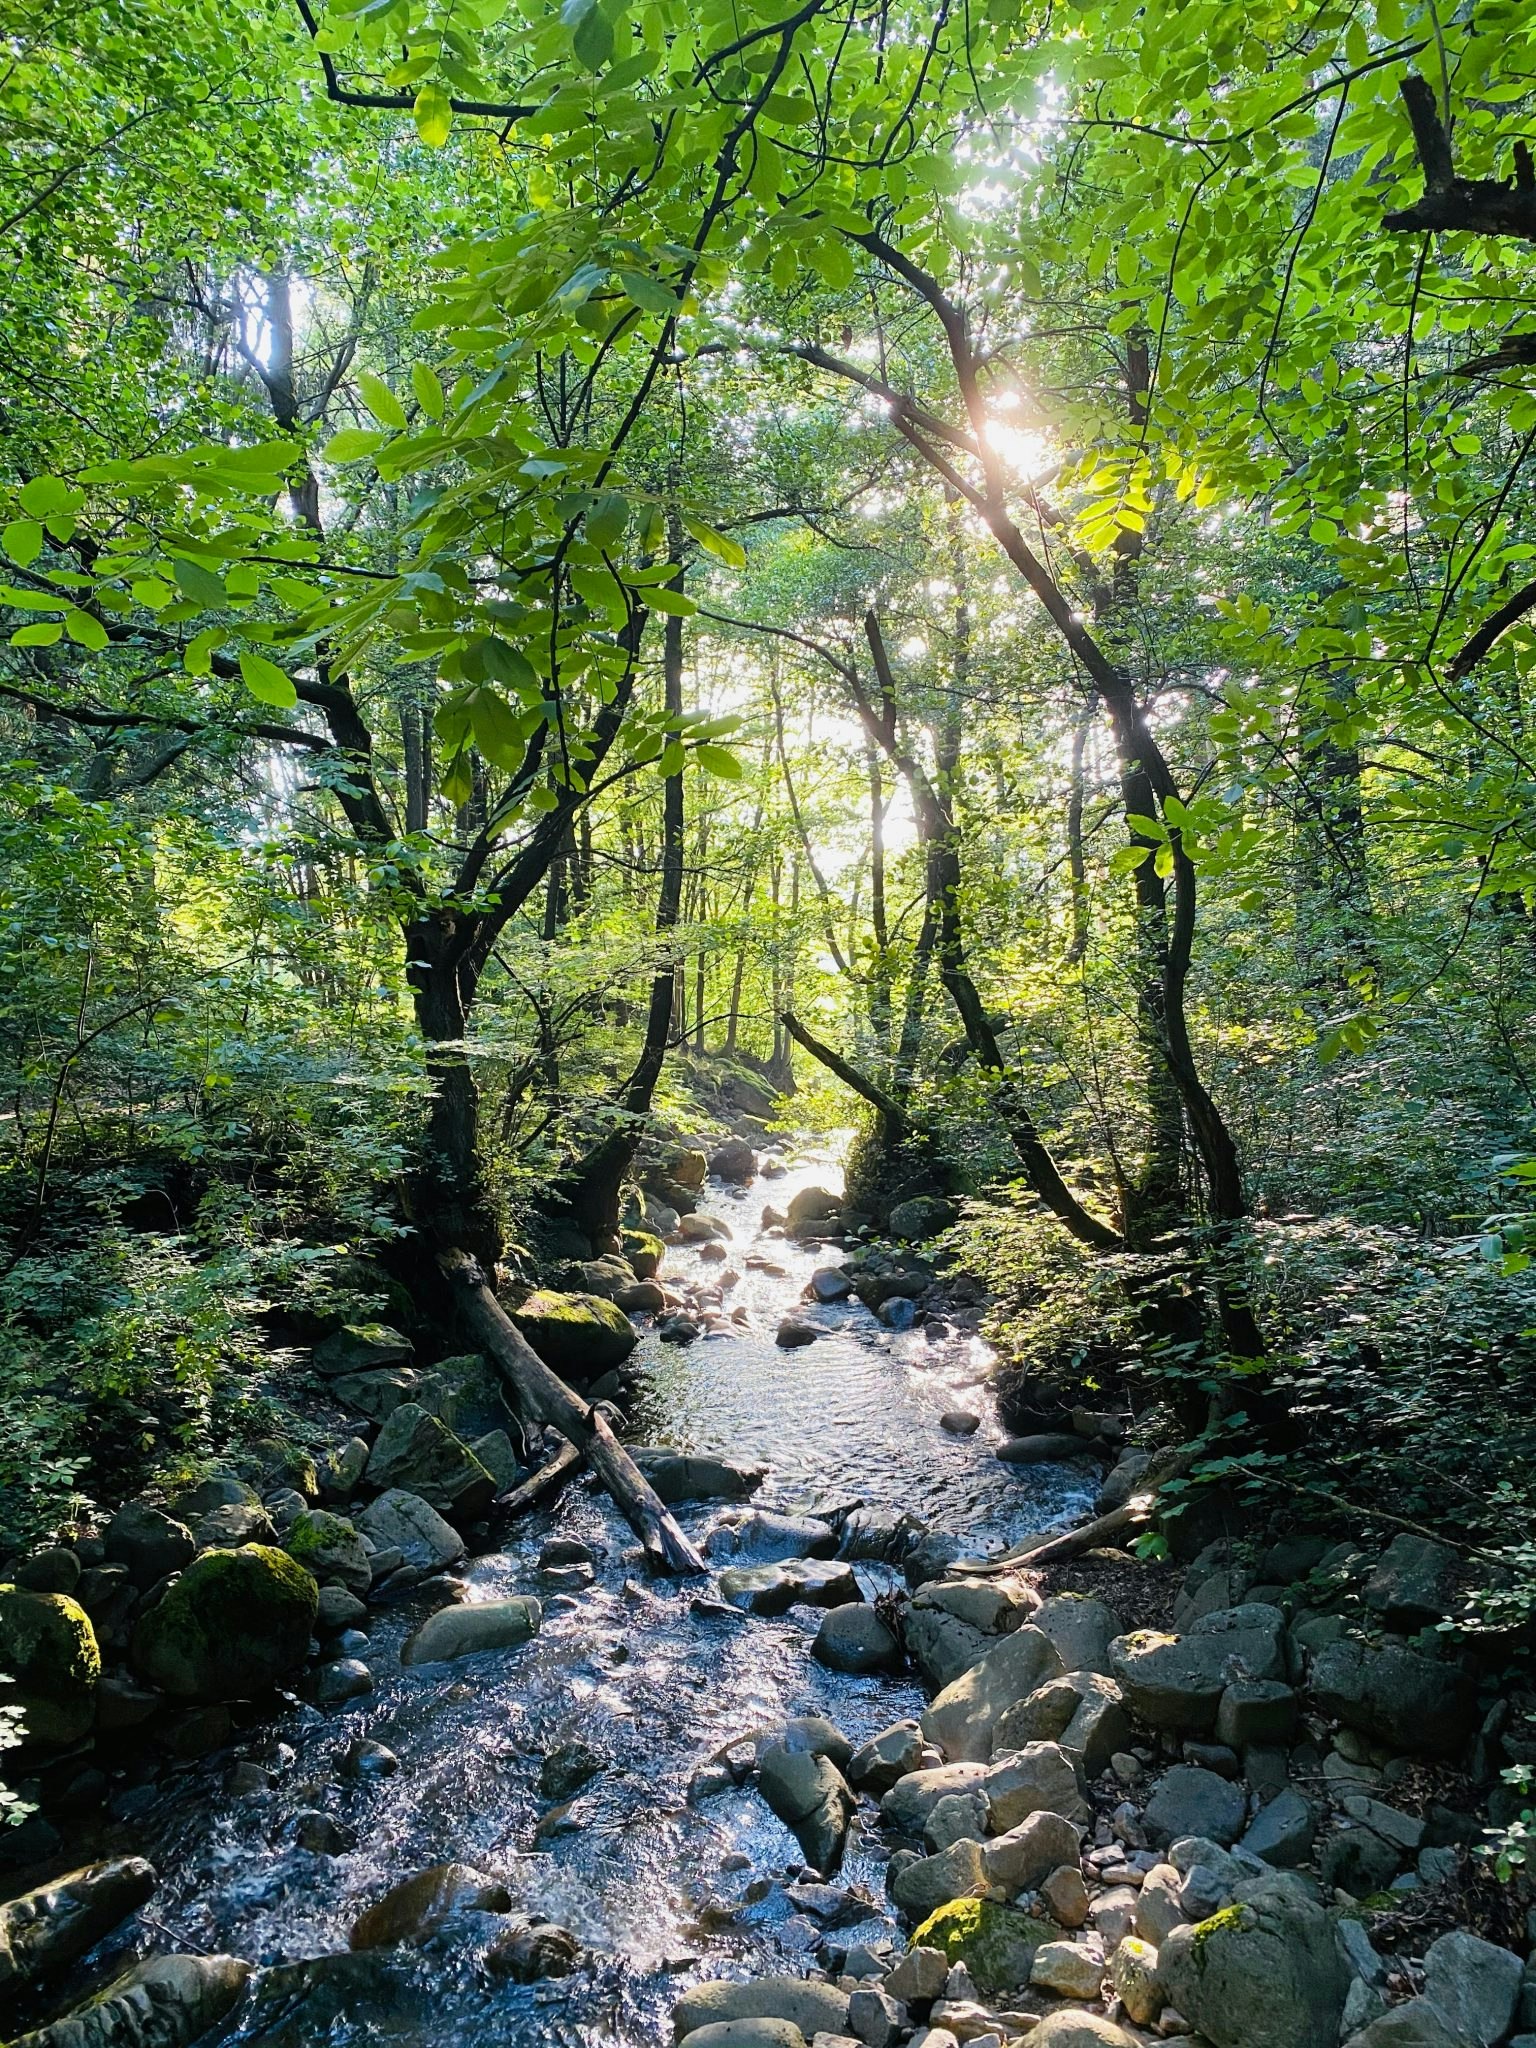 A stream in a forest near to the Philippen residence — one of many examples of relocating to the countryside in Europe.